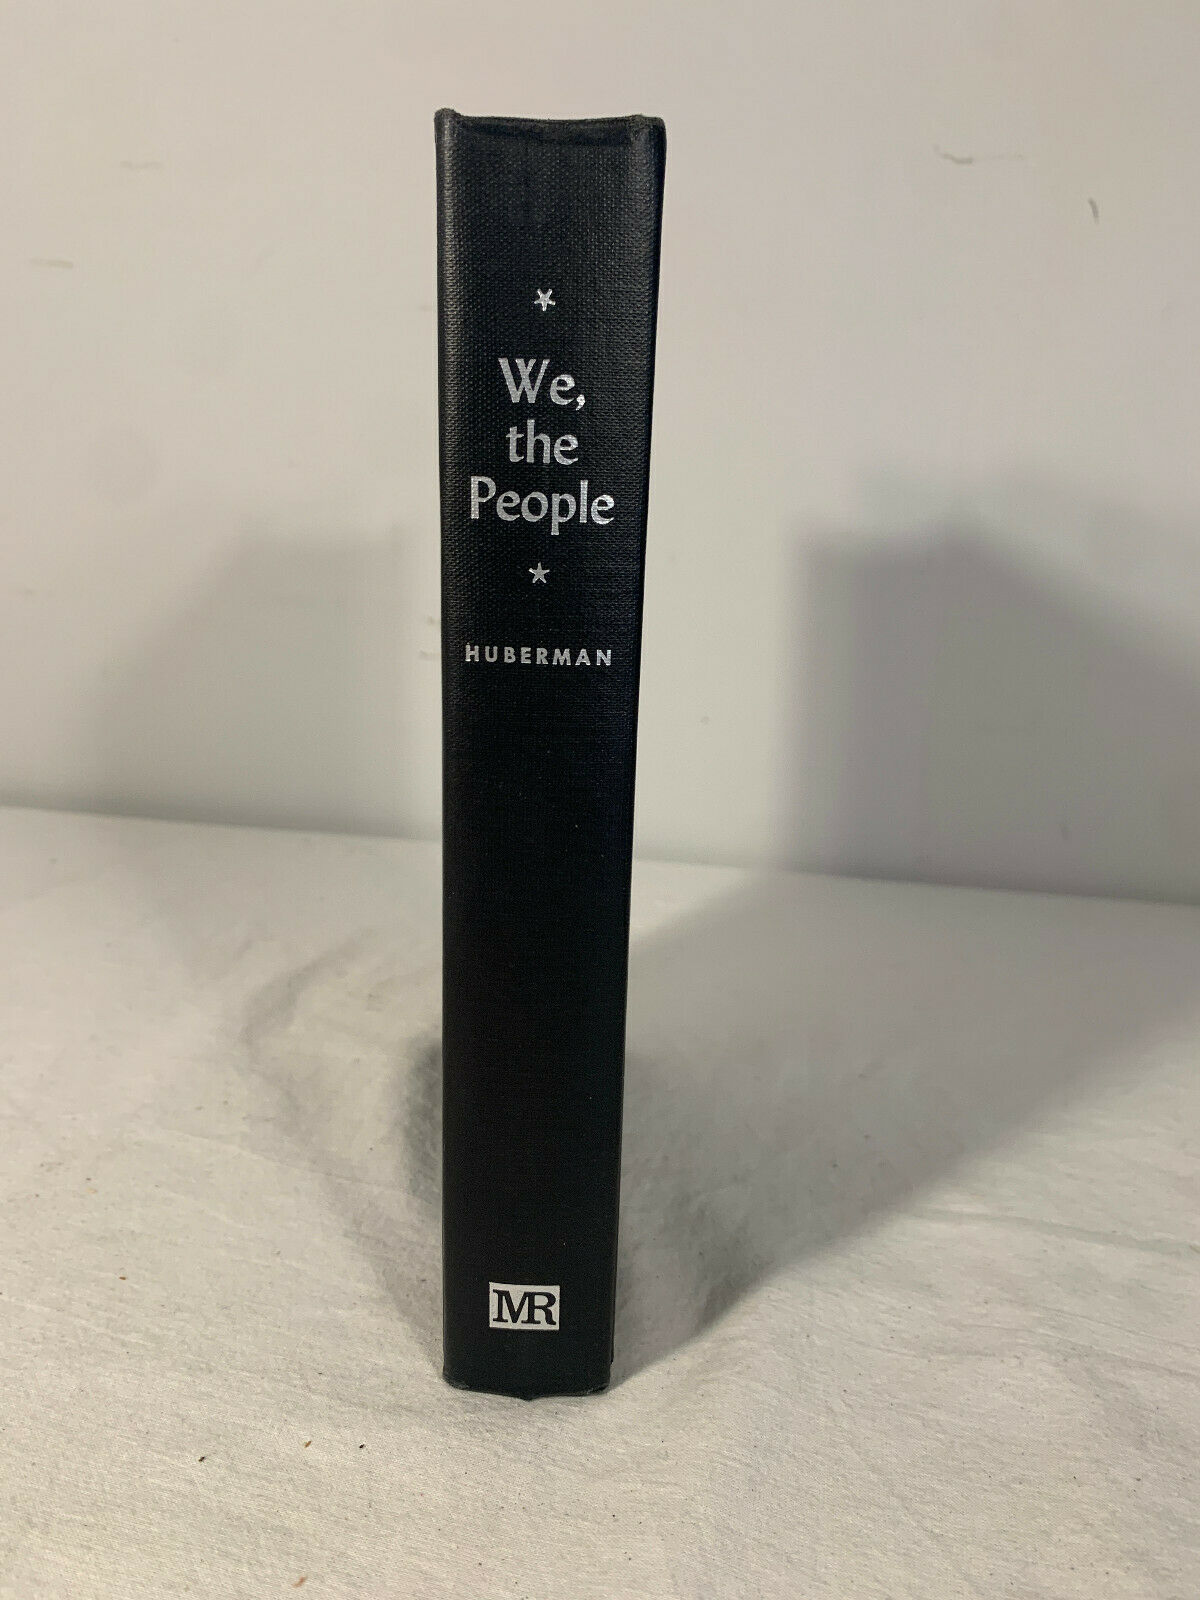 We, The People by Leo Huberman (Revised Edition) 1960 Hardcover